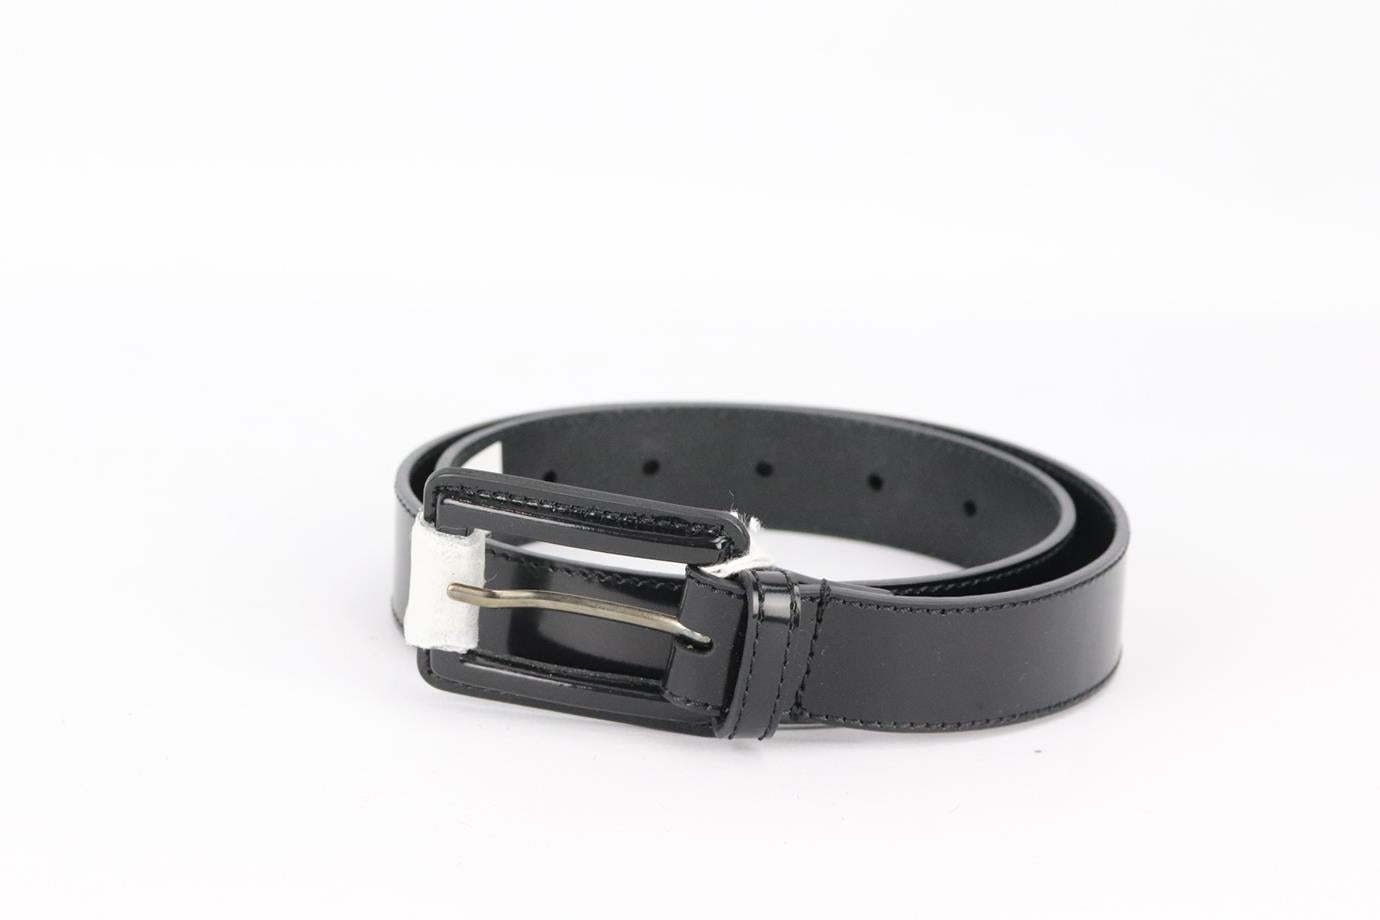 Christian Dior leather waist belt. Black. Buckle fastening at front. 100% Leather. Comes with dustbag. Size: 65 cm. Min. Length: 25.2 in. Max. Length: 29.2 in. Width: 1 in. New with tags
